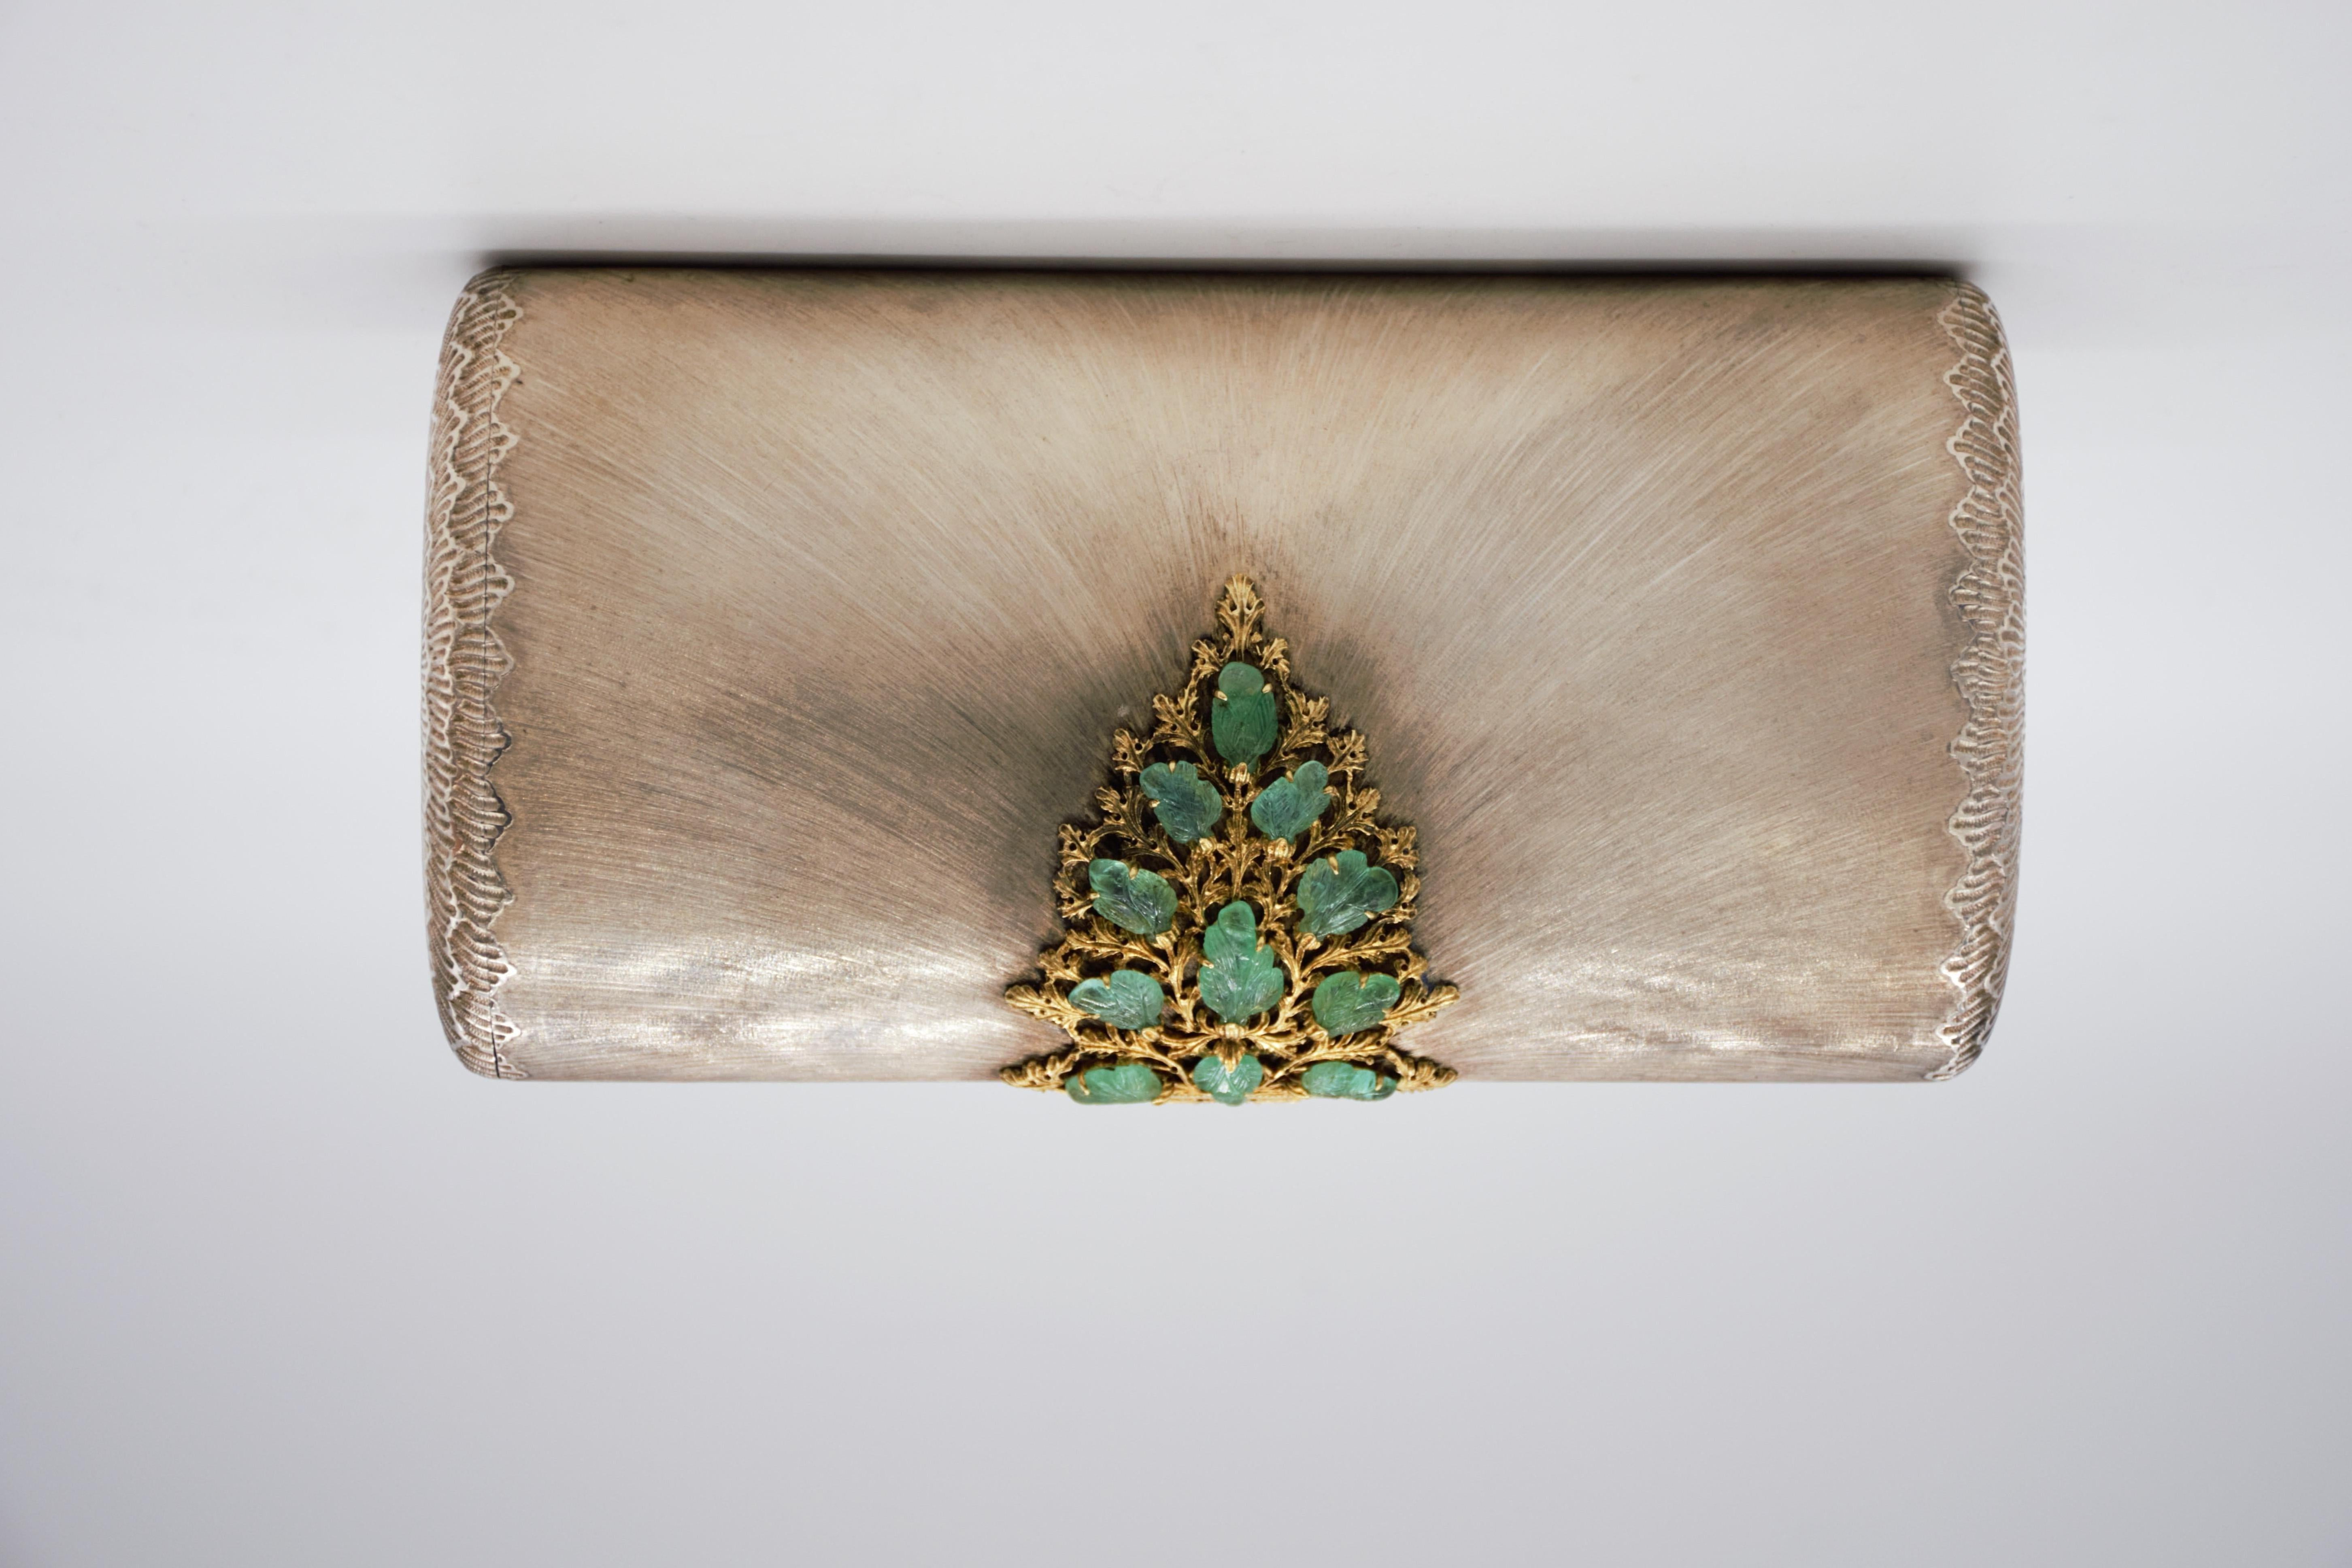 Rare and one of a kind important Mario Buccellati clutch.
Gold, silver and carved Emeralds evening bag, The silver bag engraved in a sunburst-like Pattern, the clasp set with 11 carved emeralds, carved as leaves , set on an 18 karat gold Clasp.
